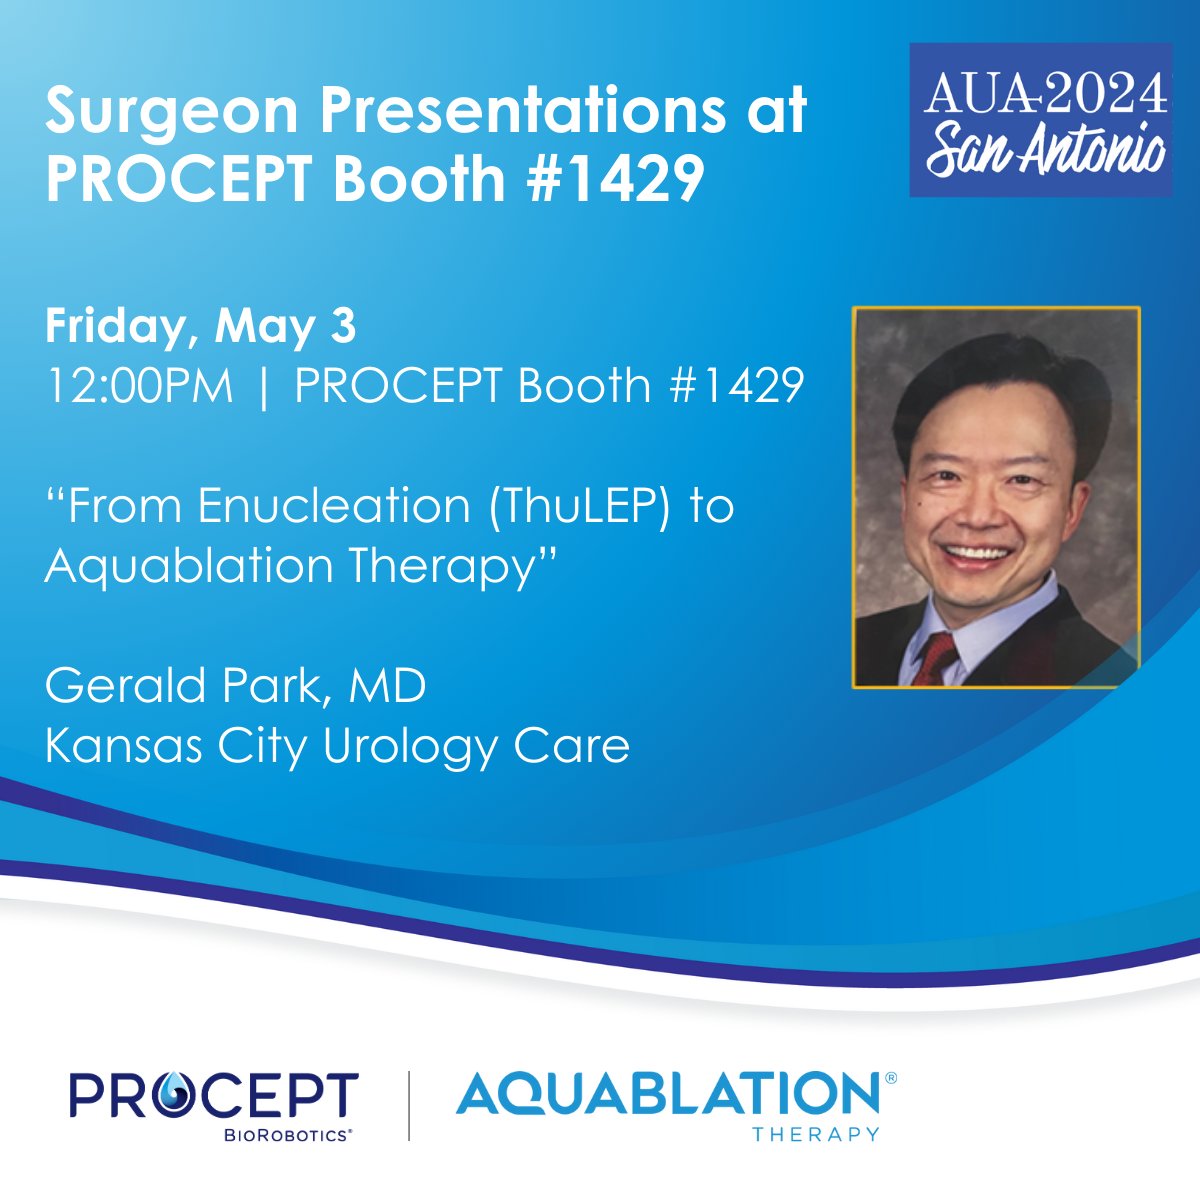 Today at #AUA2024, visit the PROCEPT BioRobotics booth #1429 at 12:00PM. You don't want to miss this insightful presentation by Dr. Gerald Park, MD -Kansas City Urology Care